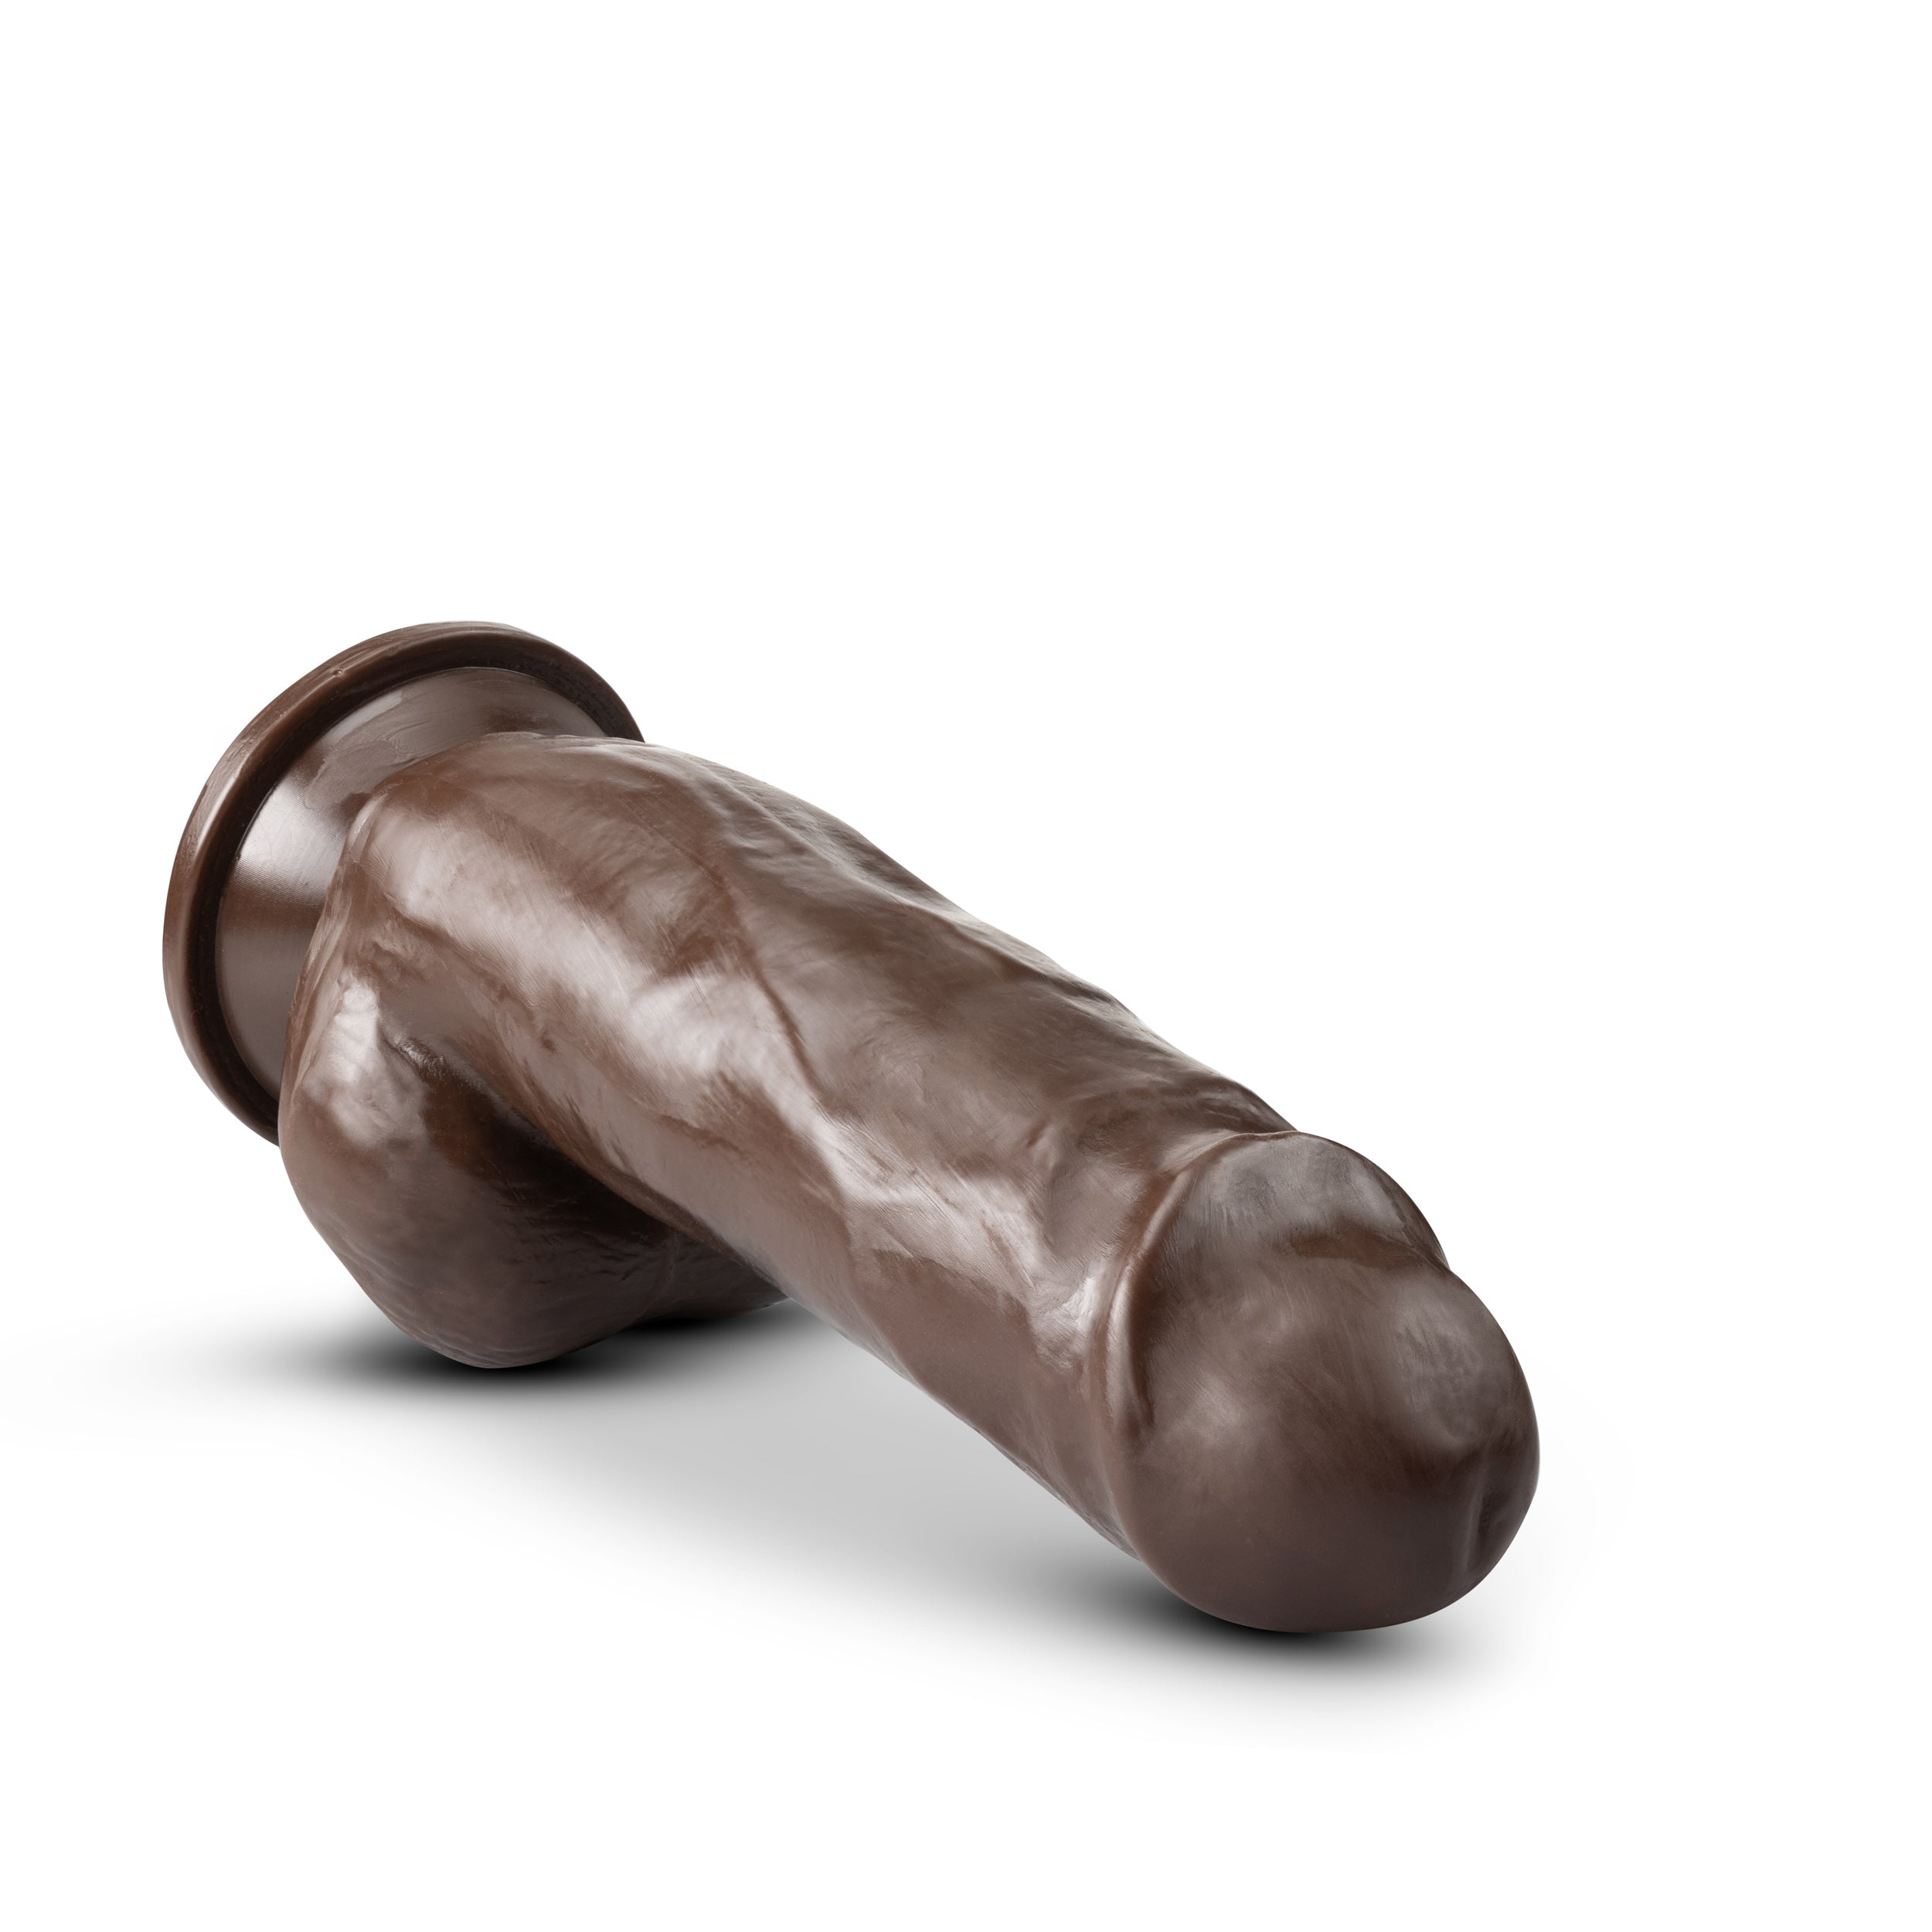 Dr. Skin Plus: 7 Inch Poseable, Girthy Dildo with Balls in Chocolate